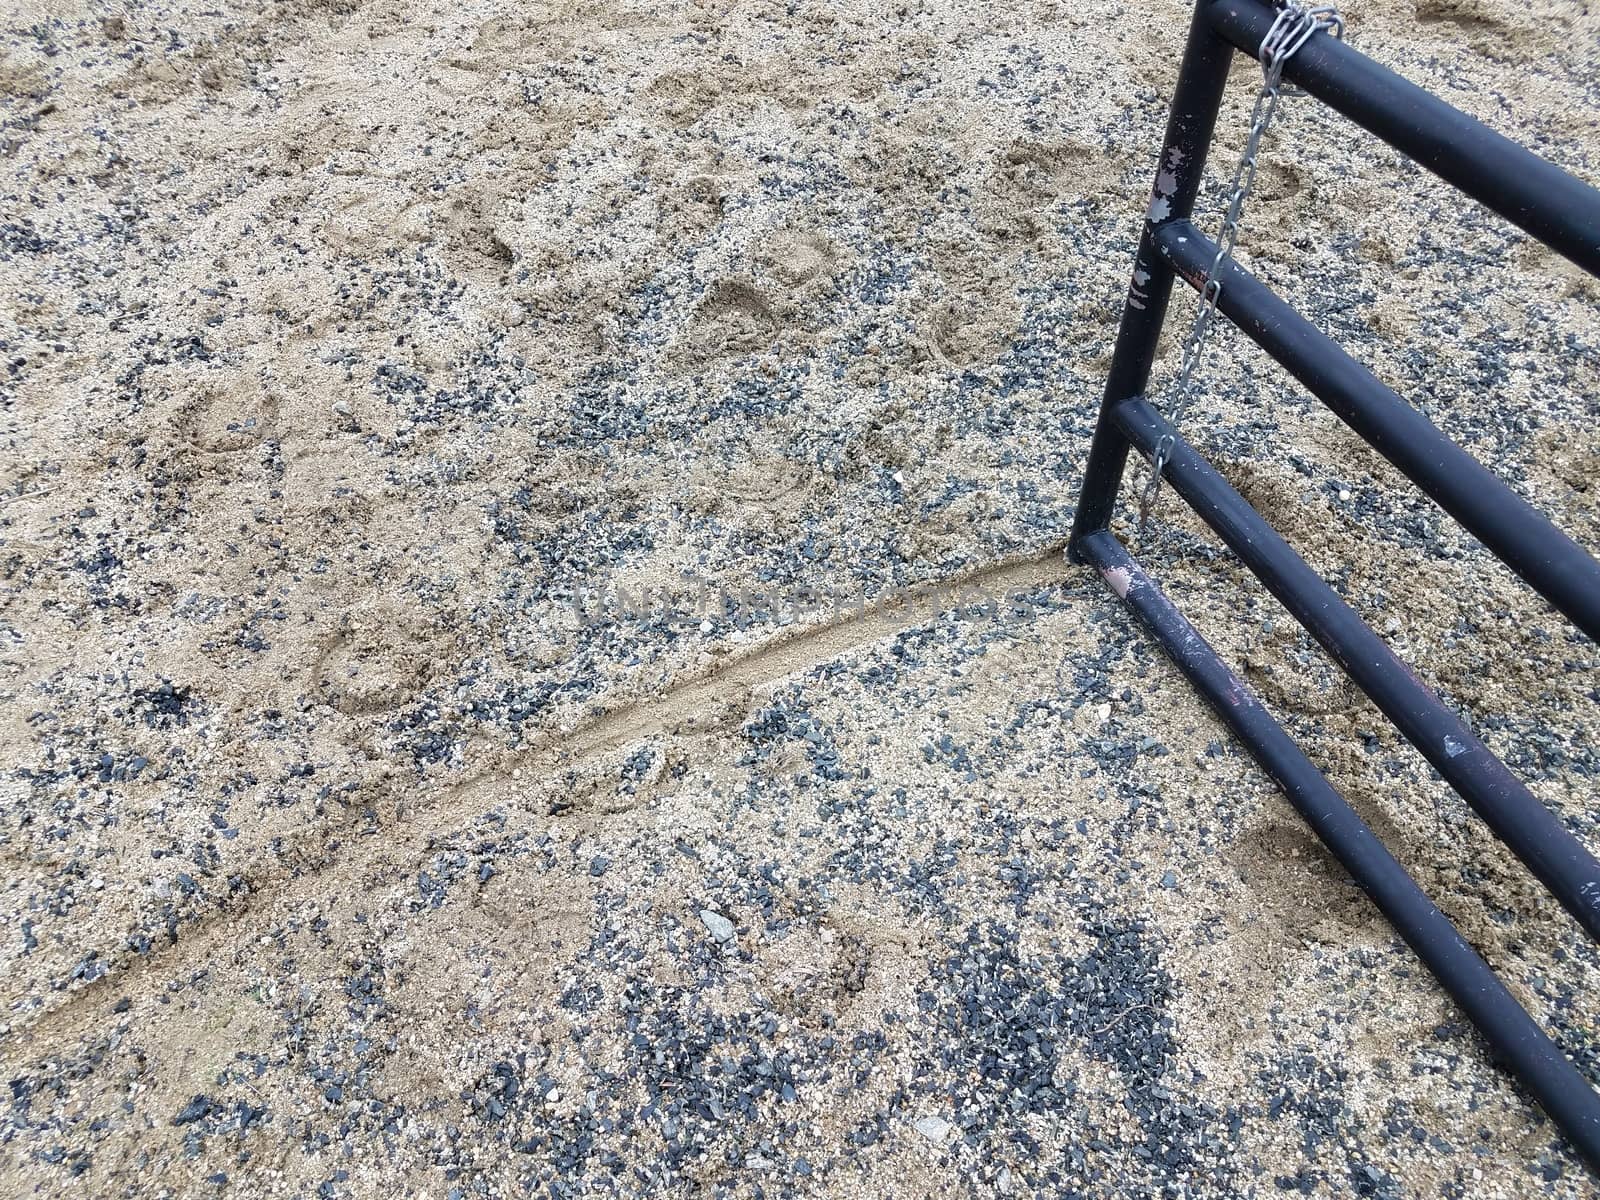 black metal fence or gate with trail in ground or sand and horse shoe prints